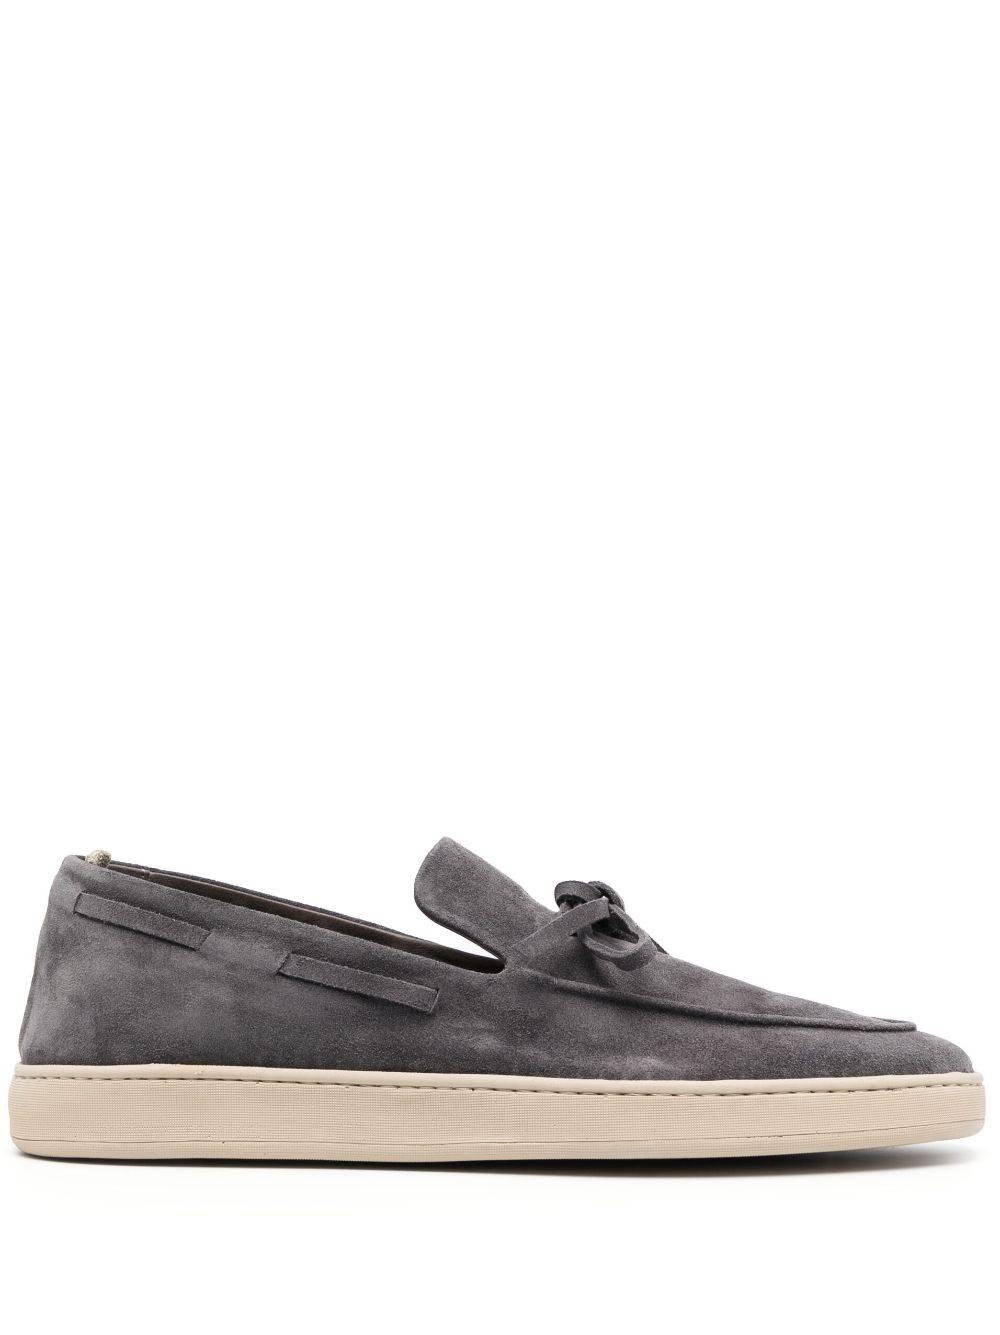 Officine Creative Suede Slip-on Loafers In Grau